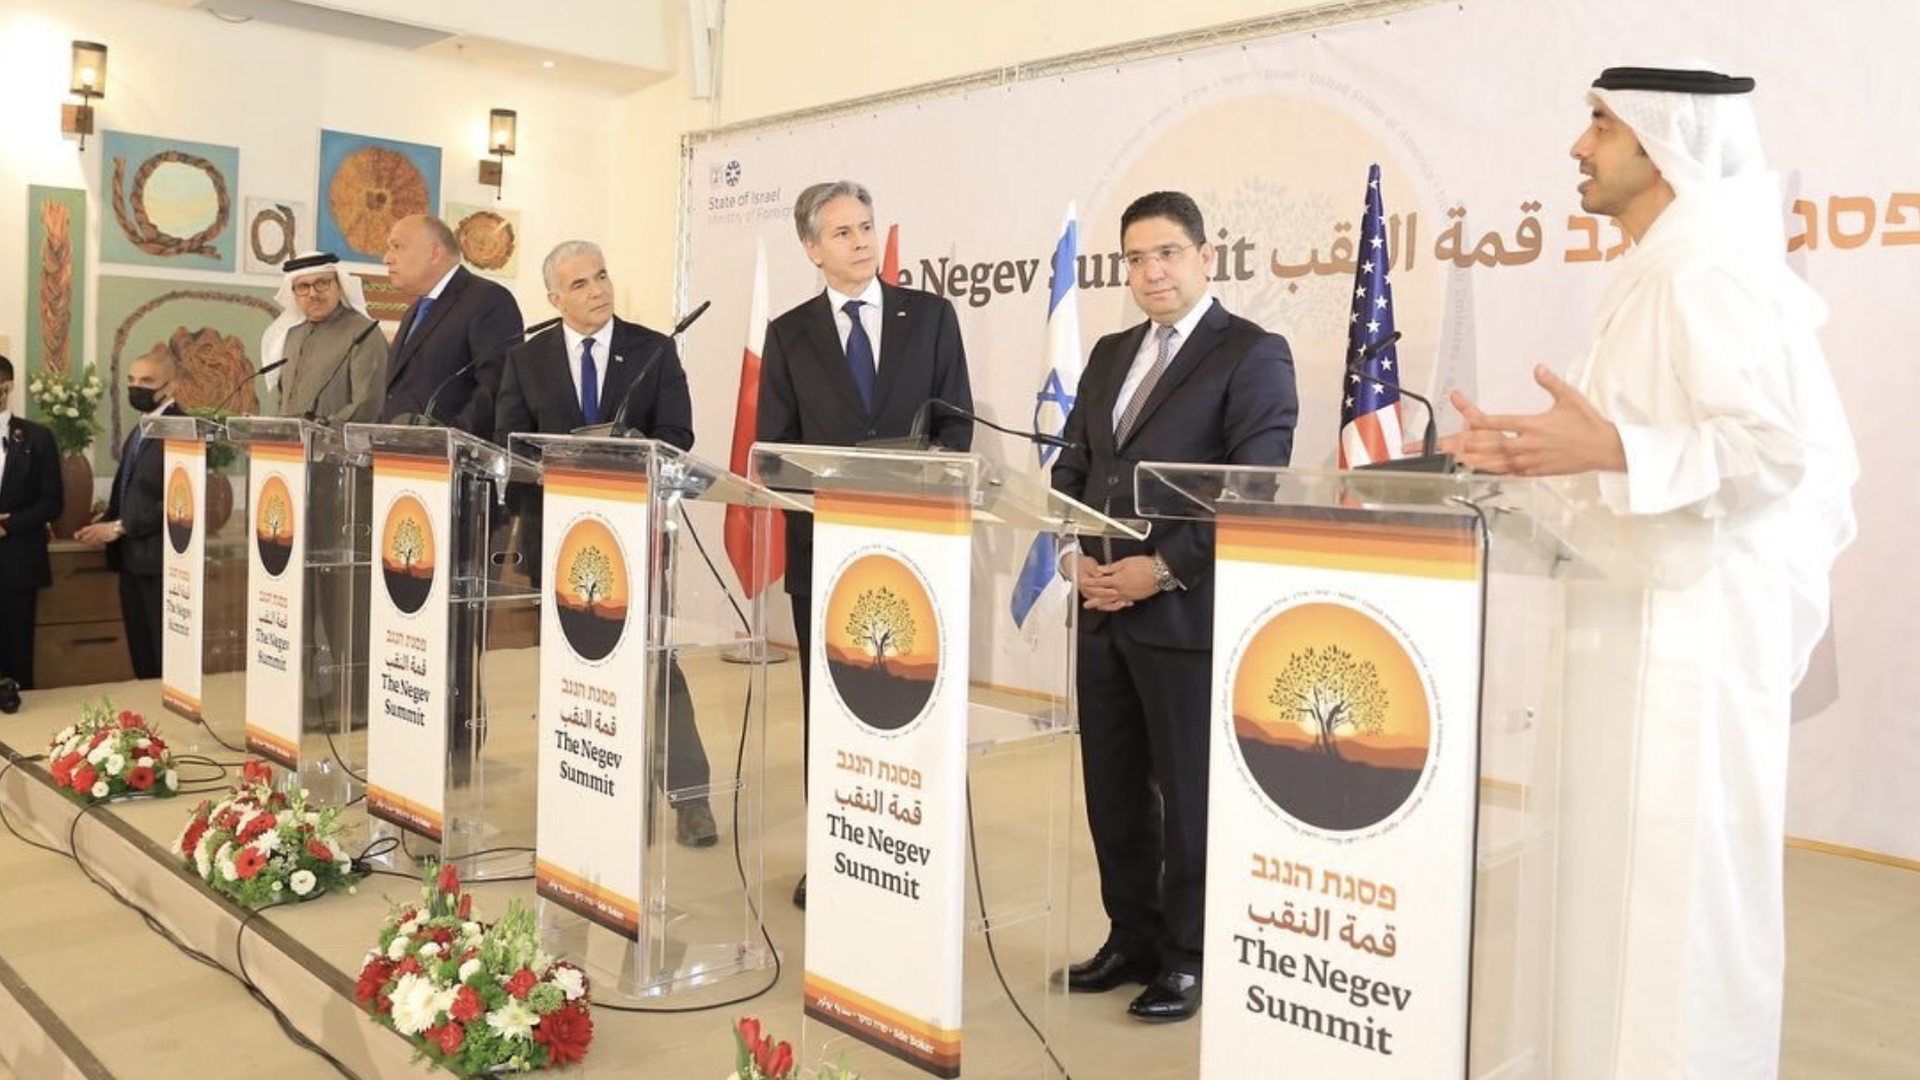 Secretary of State Tony Blinken and the foreign ministers of Bahrain, Egypt, Israel, Morocco and the UAE hold a press conference at the Negev summit in Israel in March.